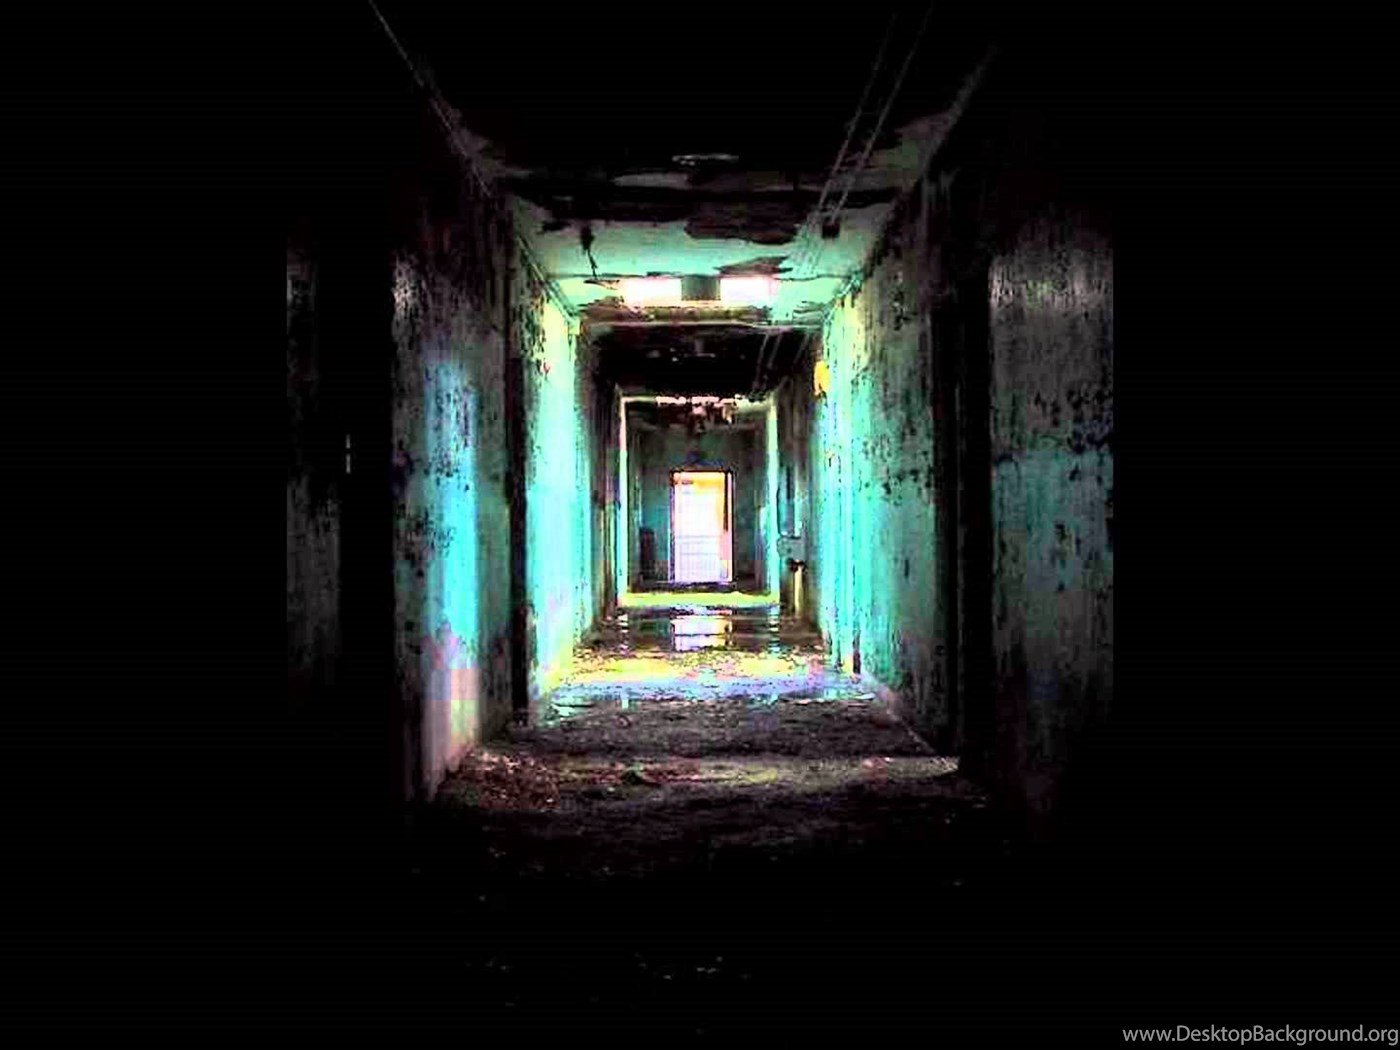 Ominous Noises The Dark Hallway (Scary Sound Effects) YouTube Desktop Background